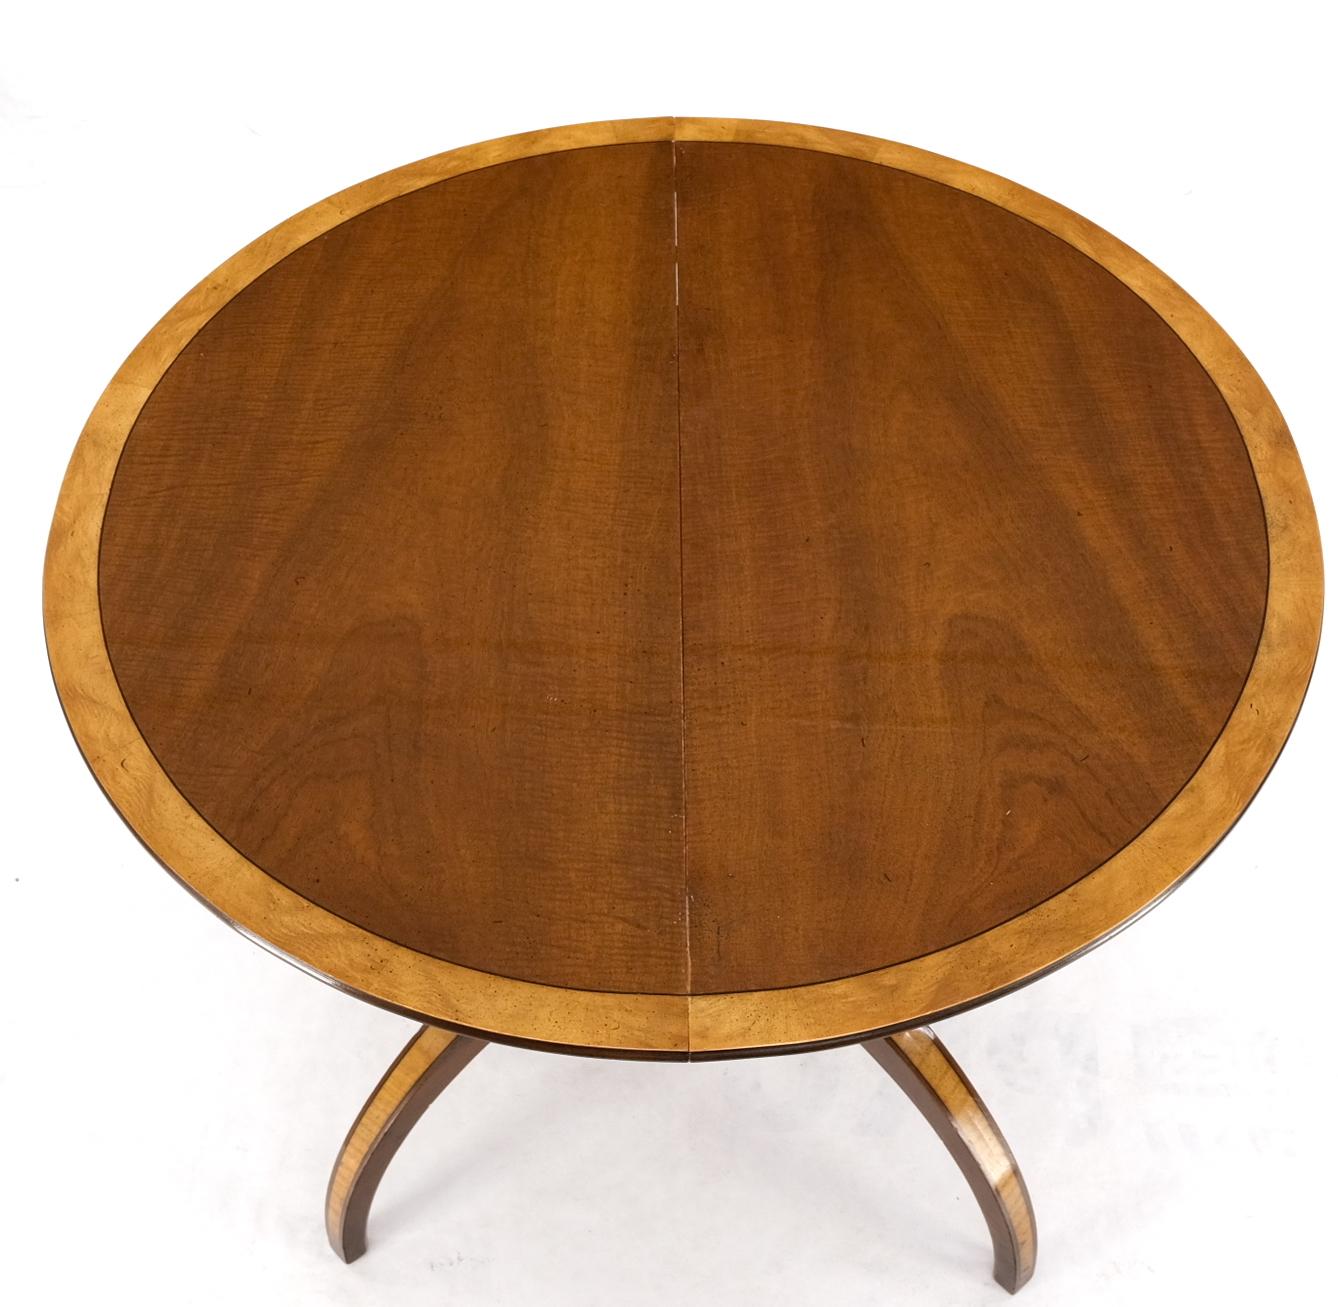 Charak Lacquered Mahogany Banded Round Dining Table w/ 2 Leaves Inlaid Legs Mint For Sale 1